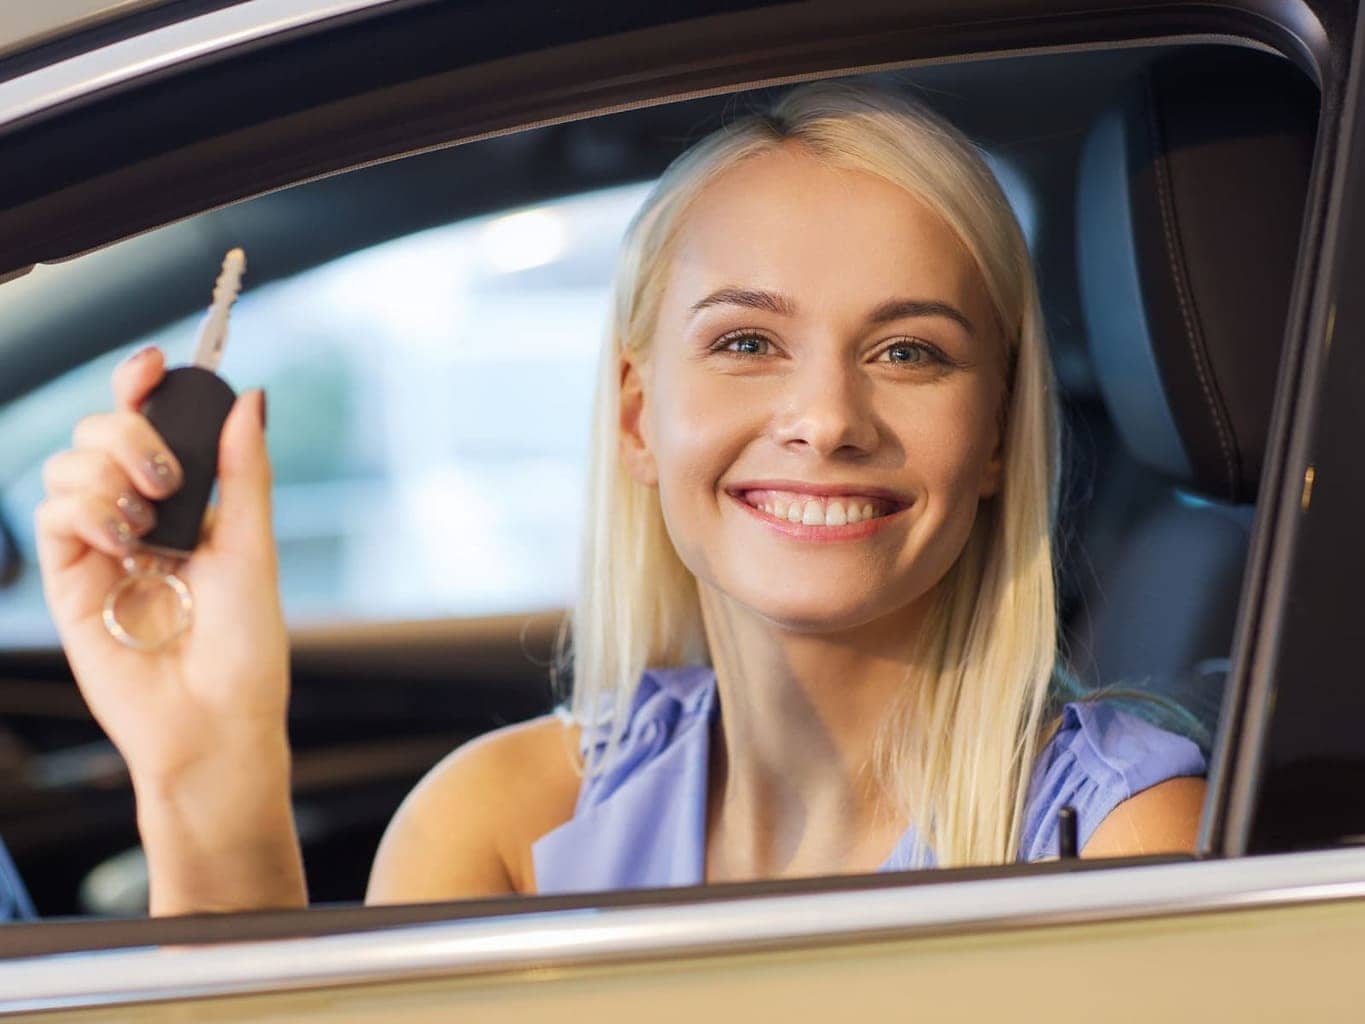 If you have a teen driver now or are preparing for one in the near future, these Teen Driver Safety Tips are the perfect way to help prepare them, and you! 